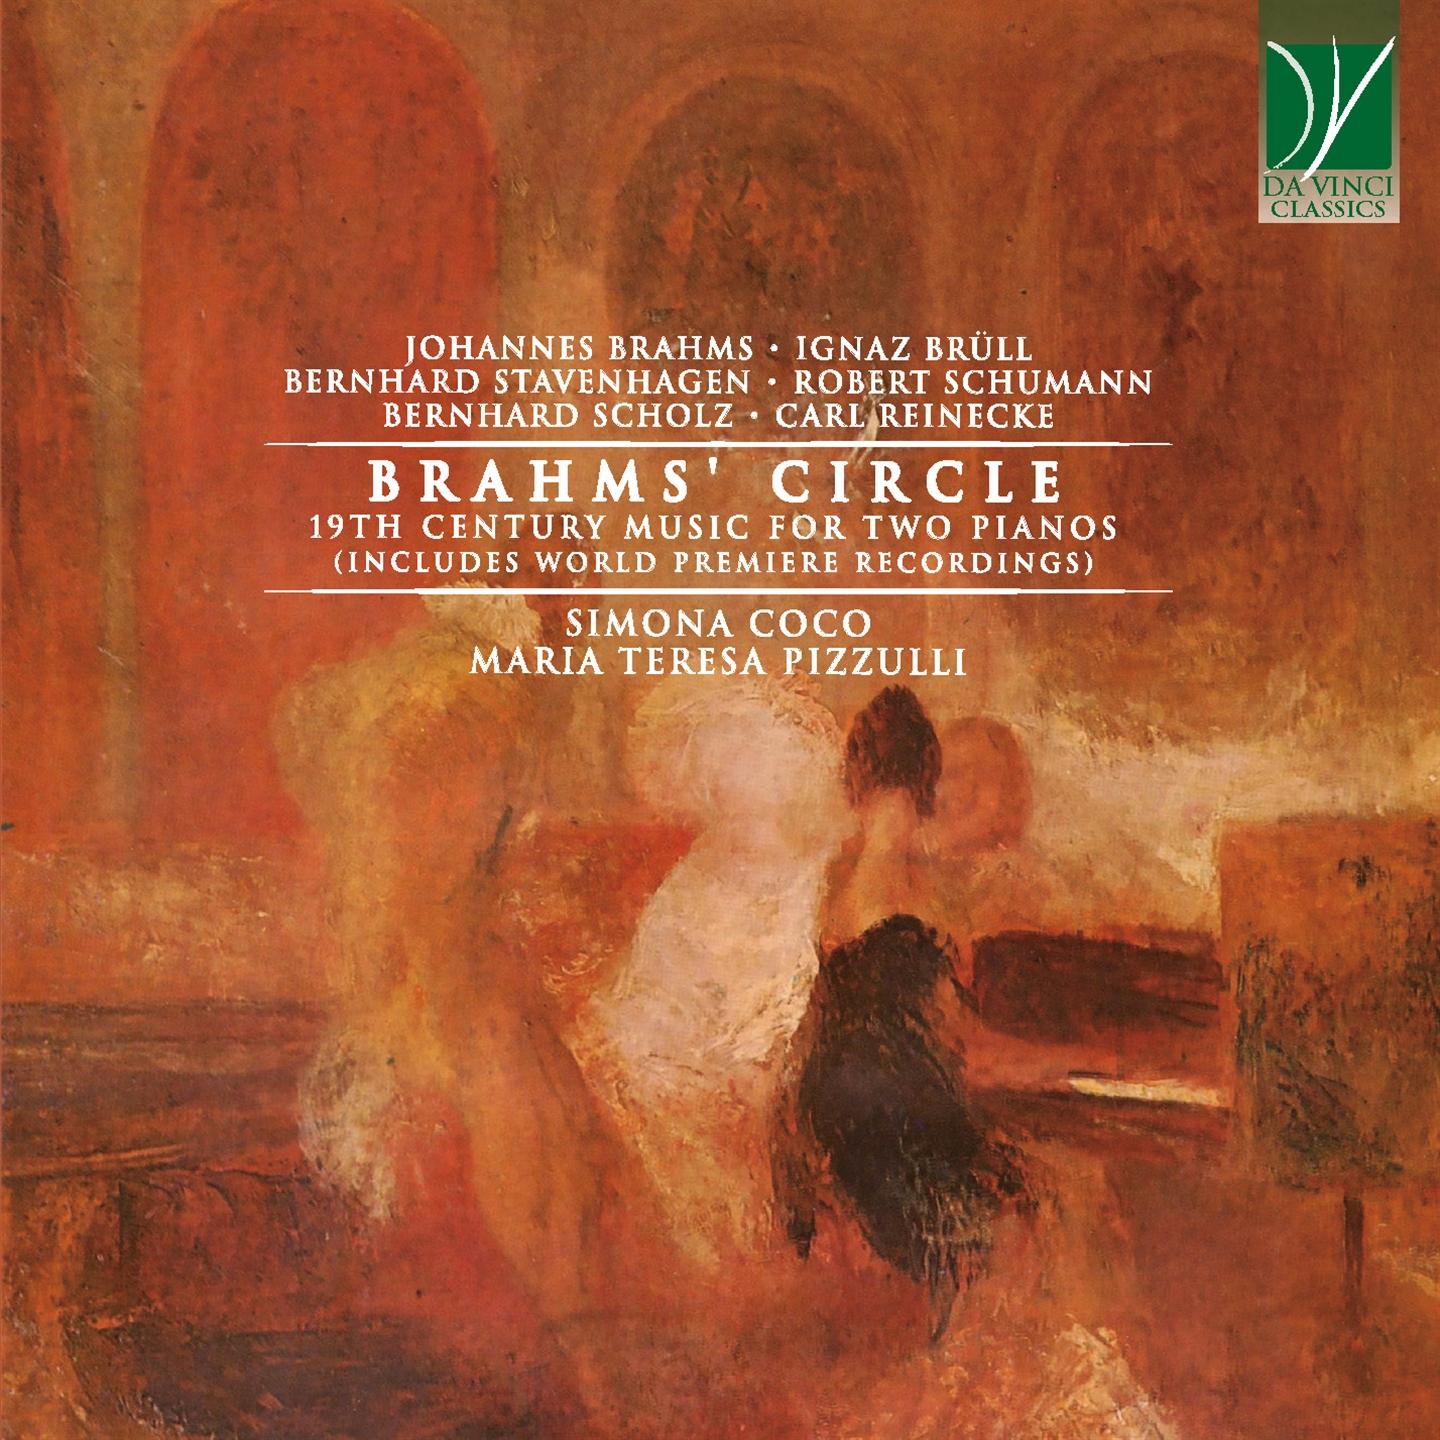 BRAHMS' CIRCLE - 19TH CENTURY MUSIC FOR TWO PIANOS